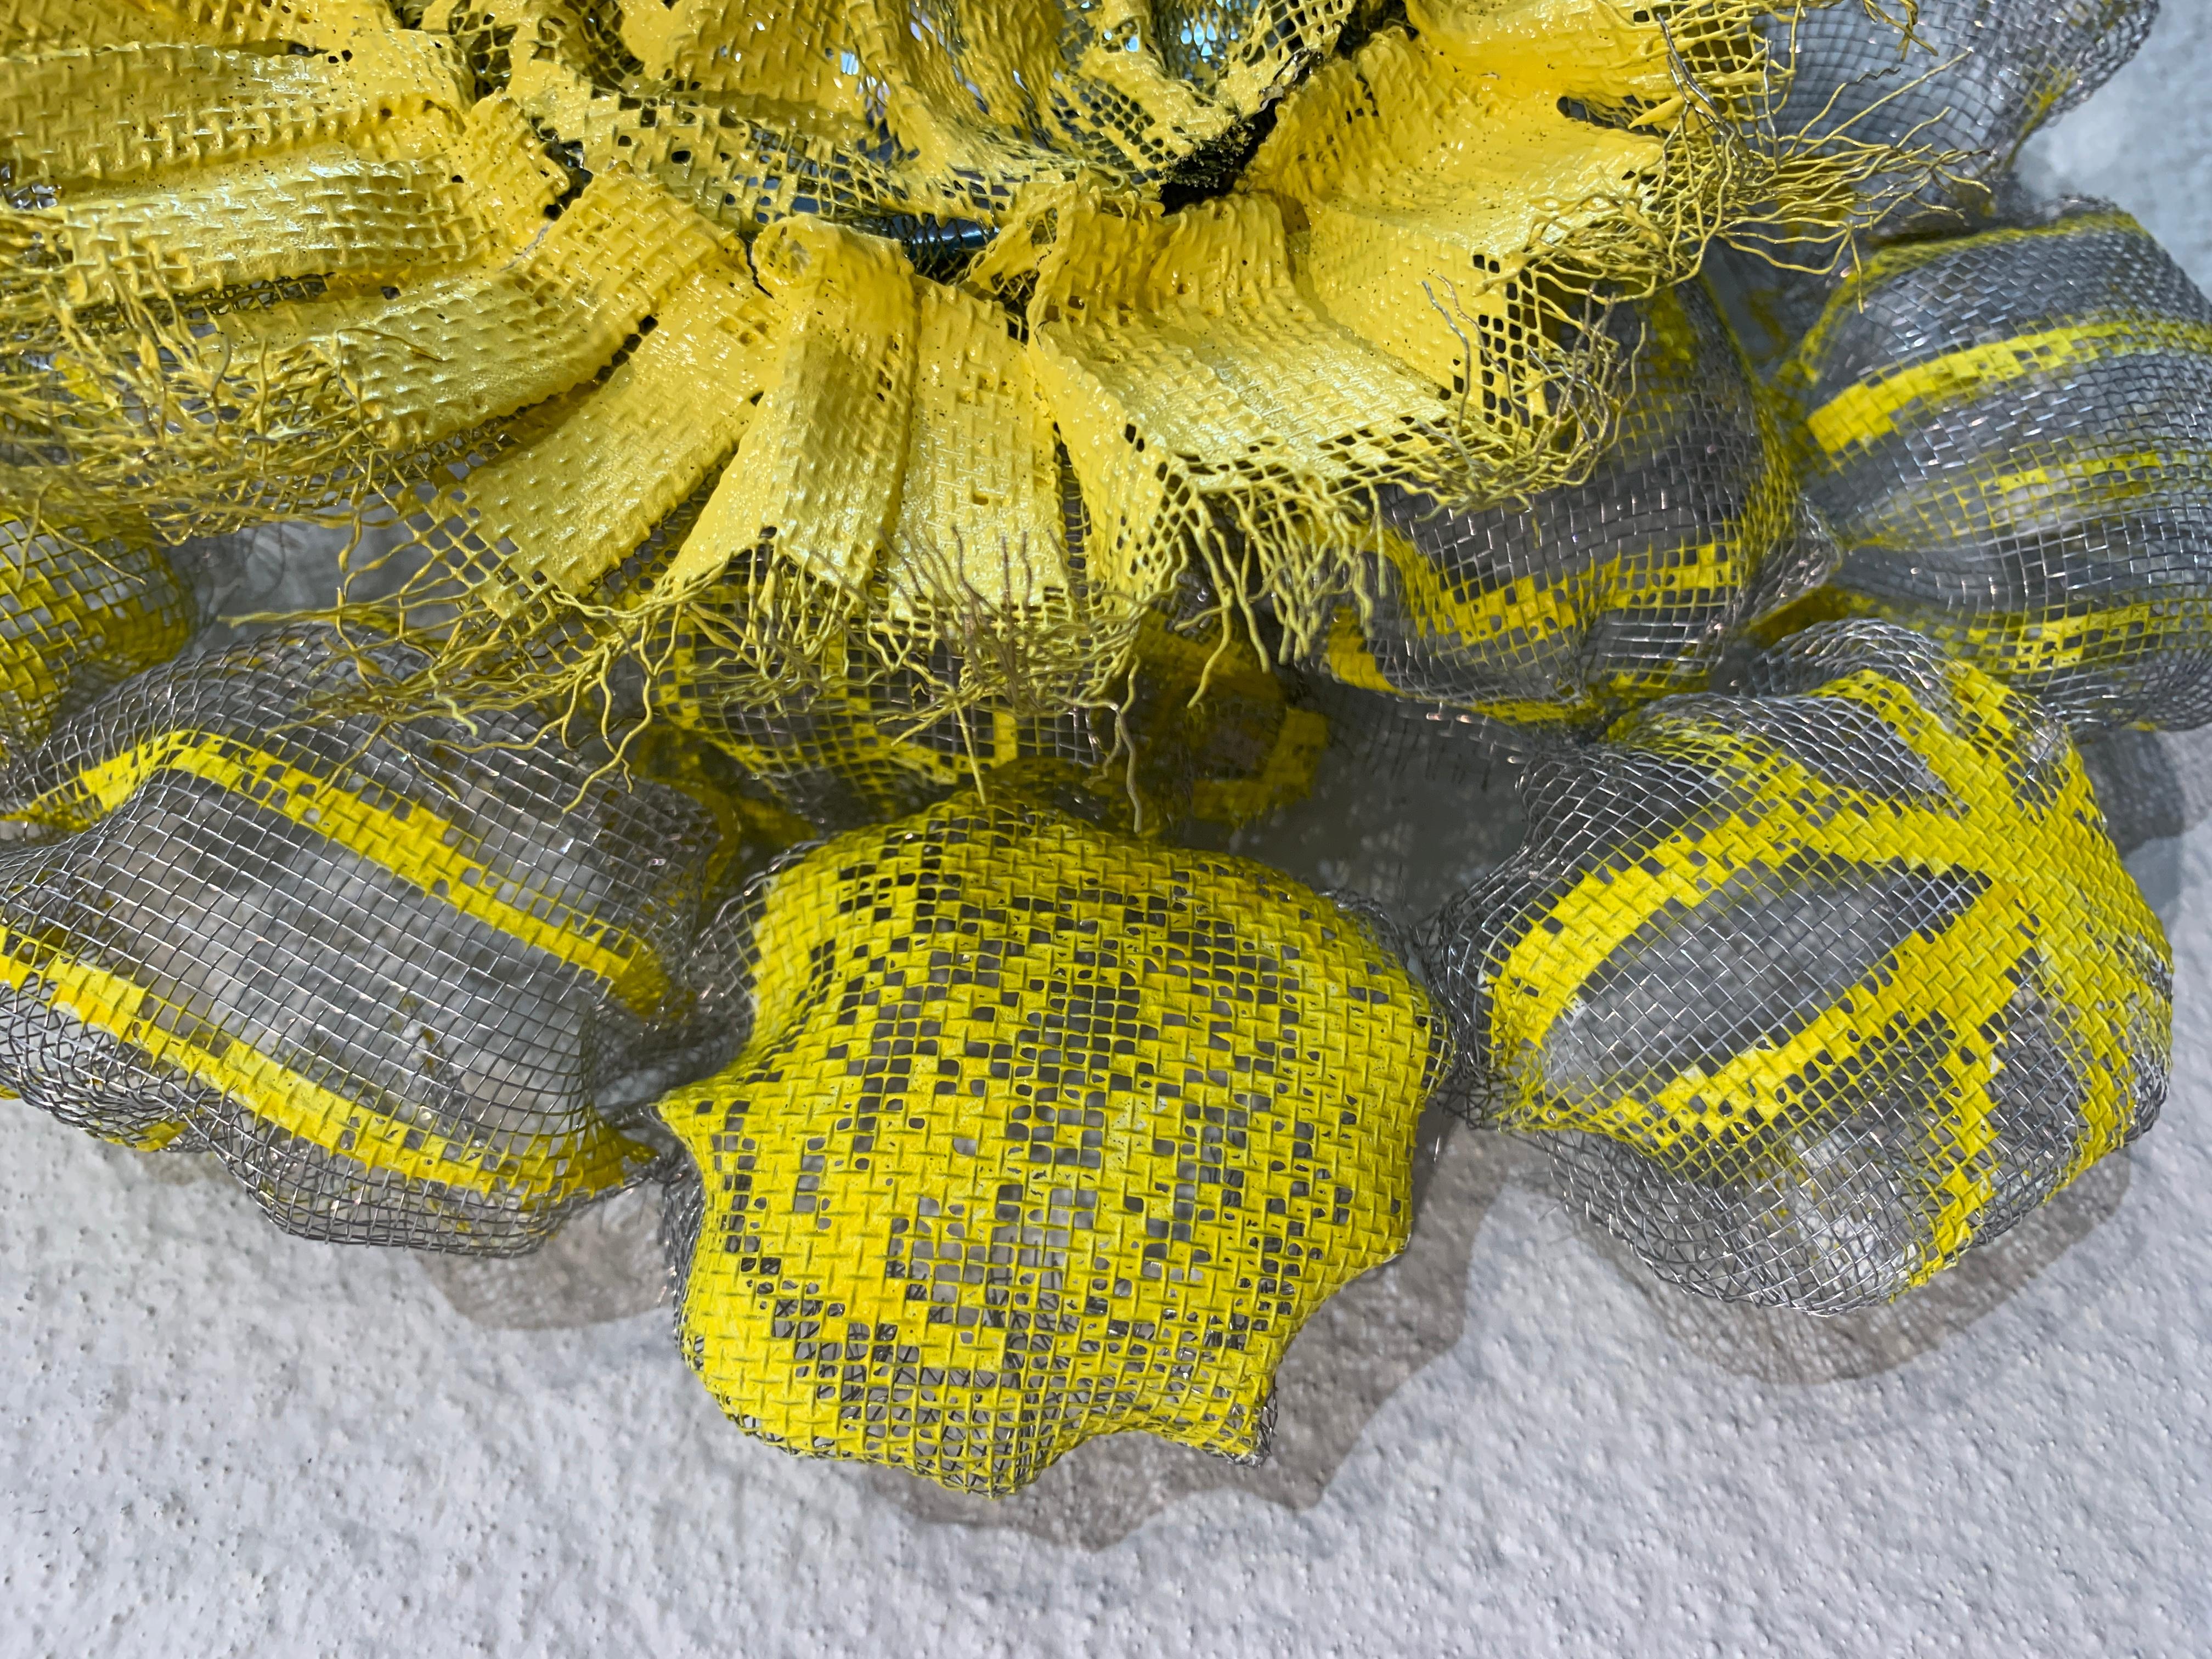 Flora Narcissus - Yellow Burst, Atticus Adams Metal Mesh & Mirror Wall Sculpture

Metal fiber sculpture that incorporates a mirror, fascinating light and shadow into its form.

NOTE:  This piece can be combined with the OTHER Flora Narcissus pieces